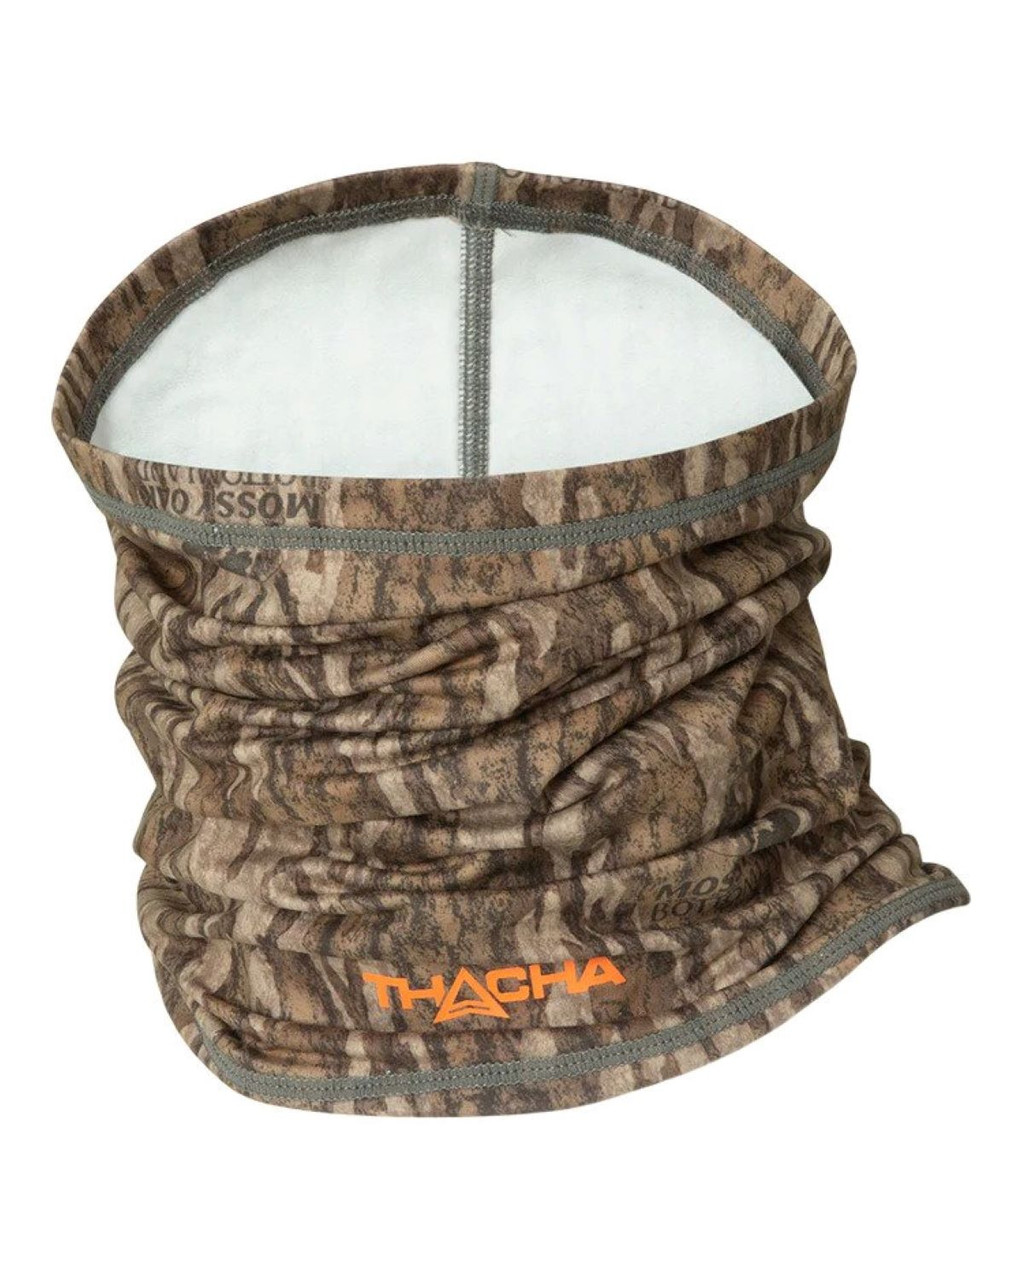 Banded Thacha L-1 Ultra-Light Weight Neck Gaiter - MO Bottomland - OSFM